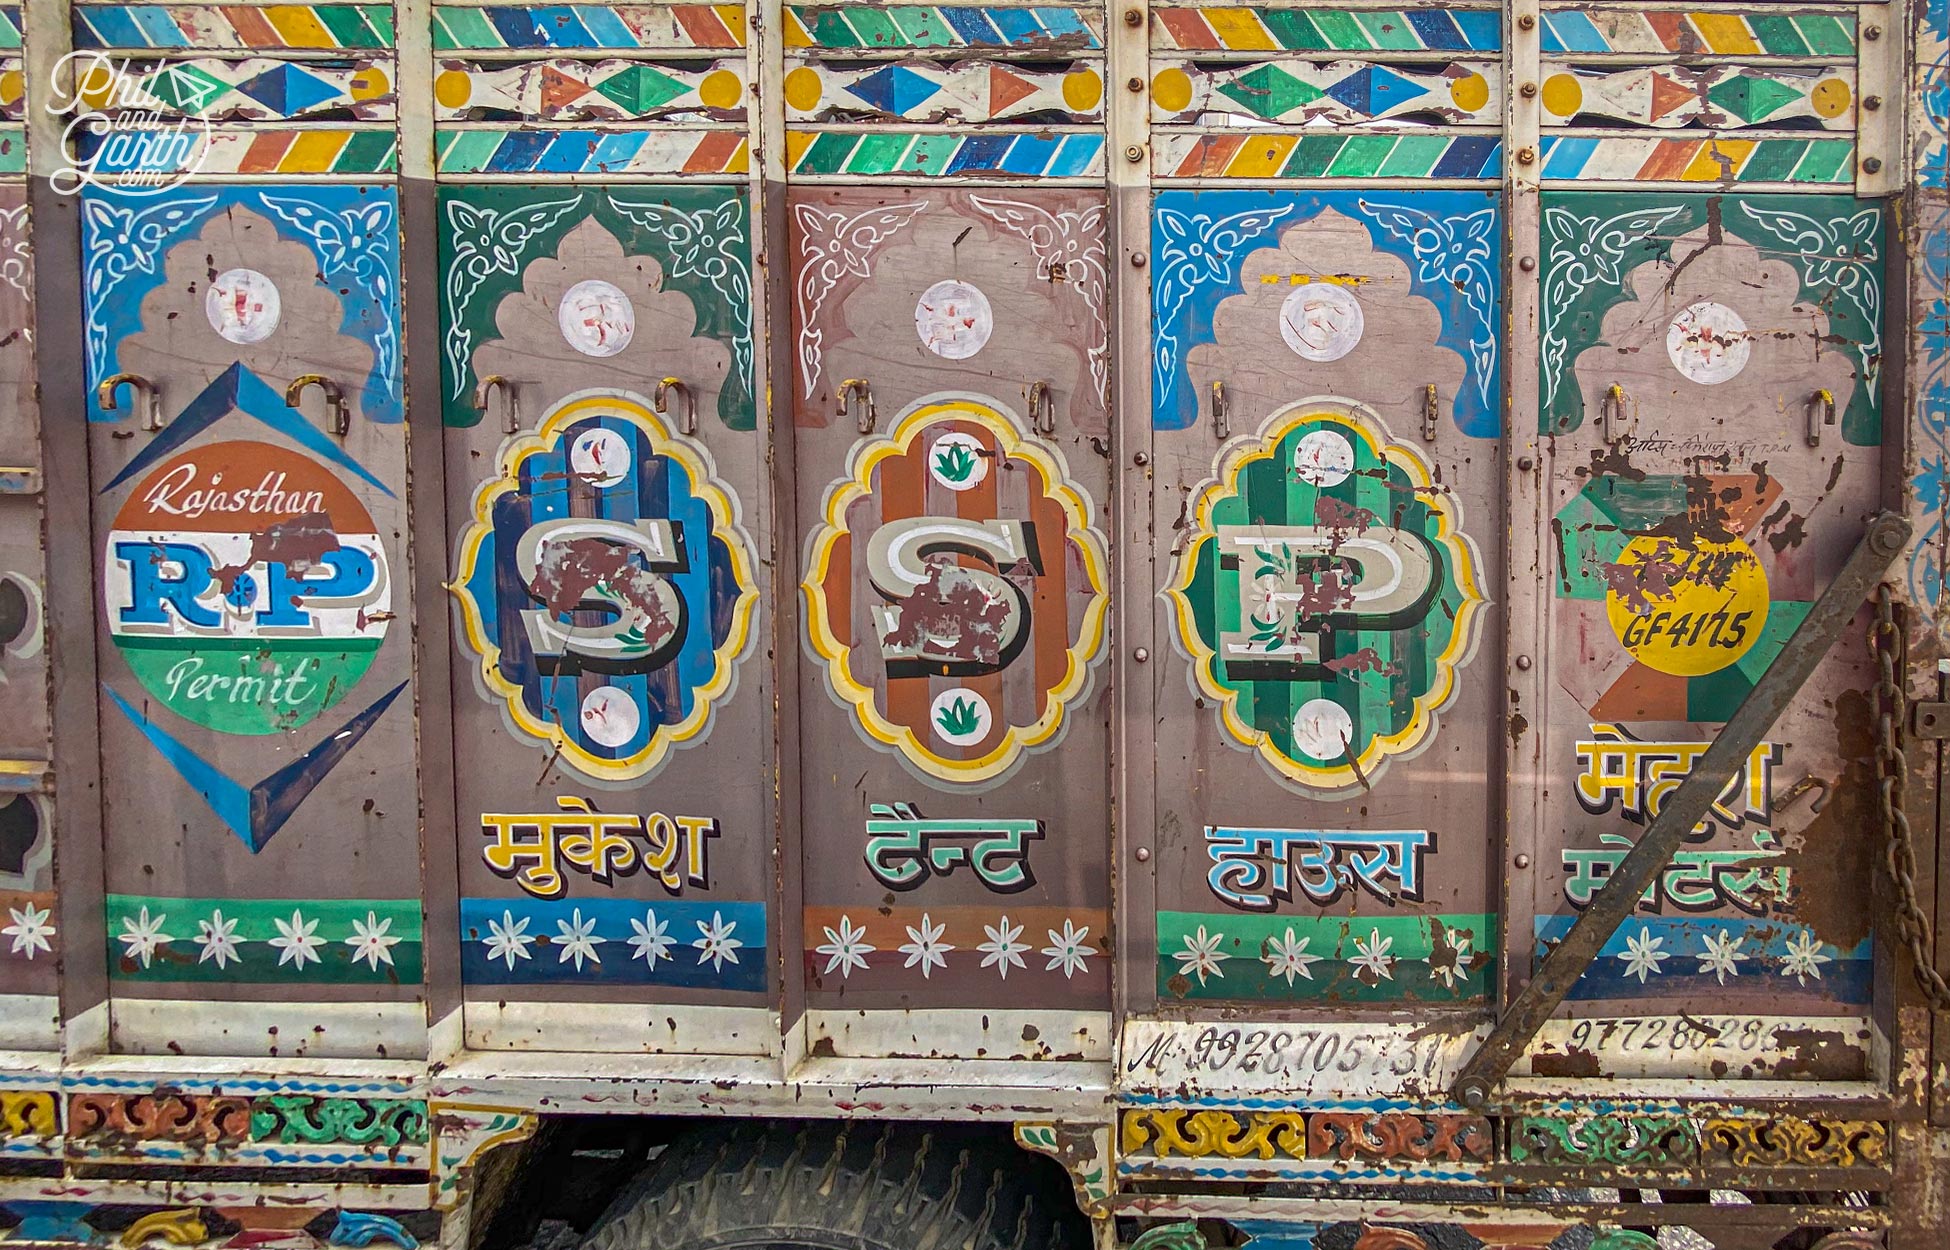 Another fabulously decorated truck - Garth loved these for the bright graphics